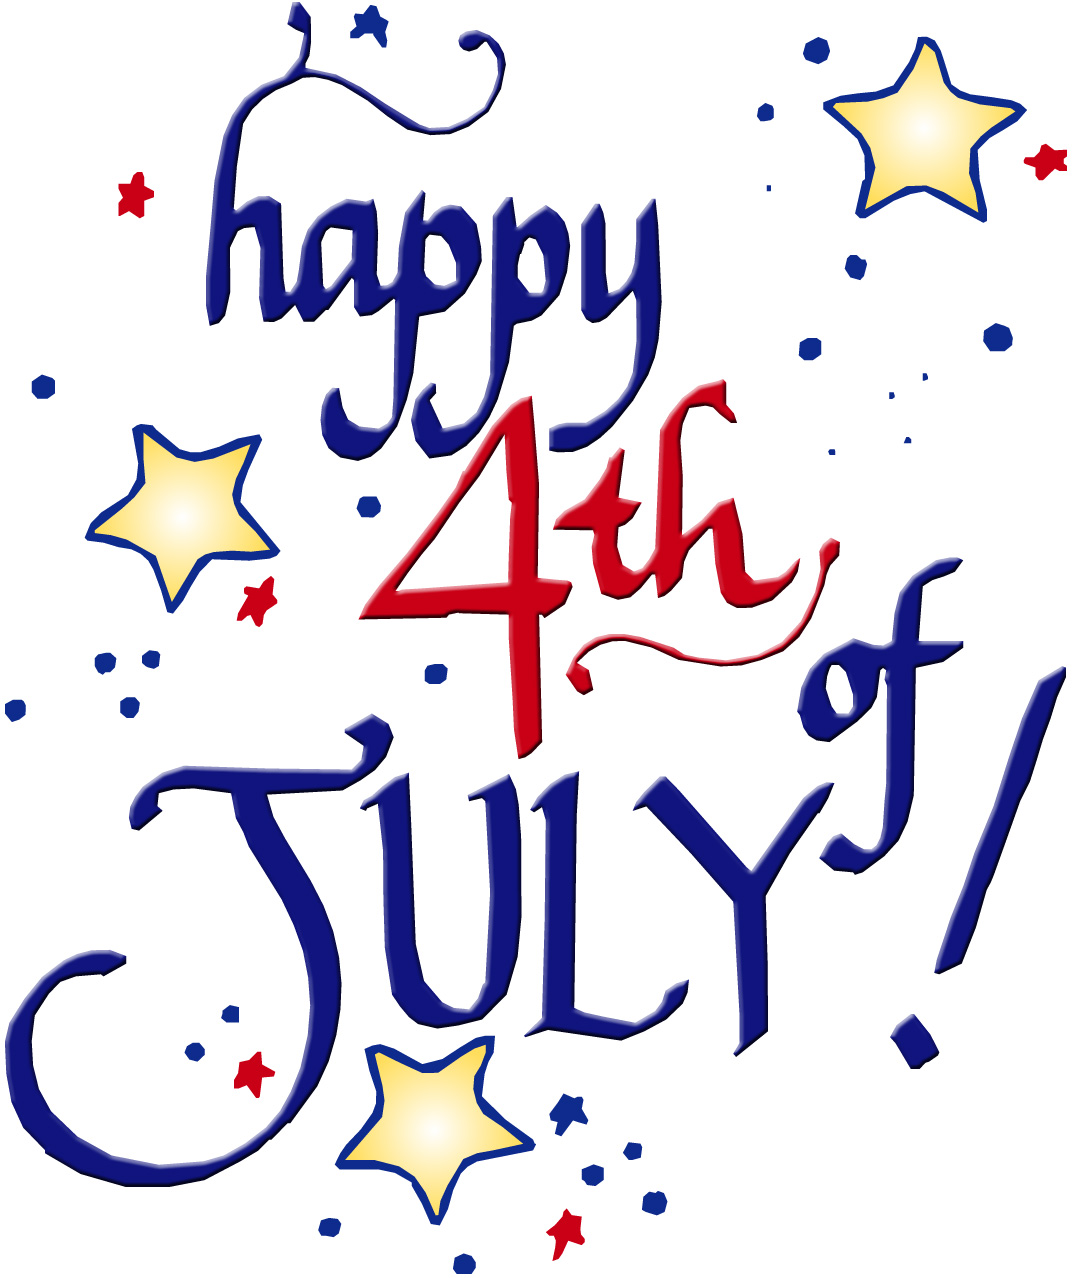 July 4th clipart july4th phot - Clip Art For 4th Of July